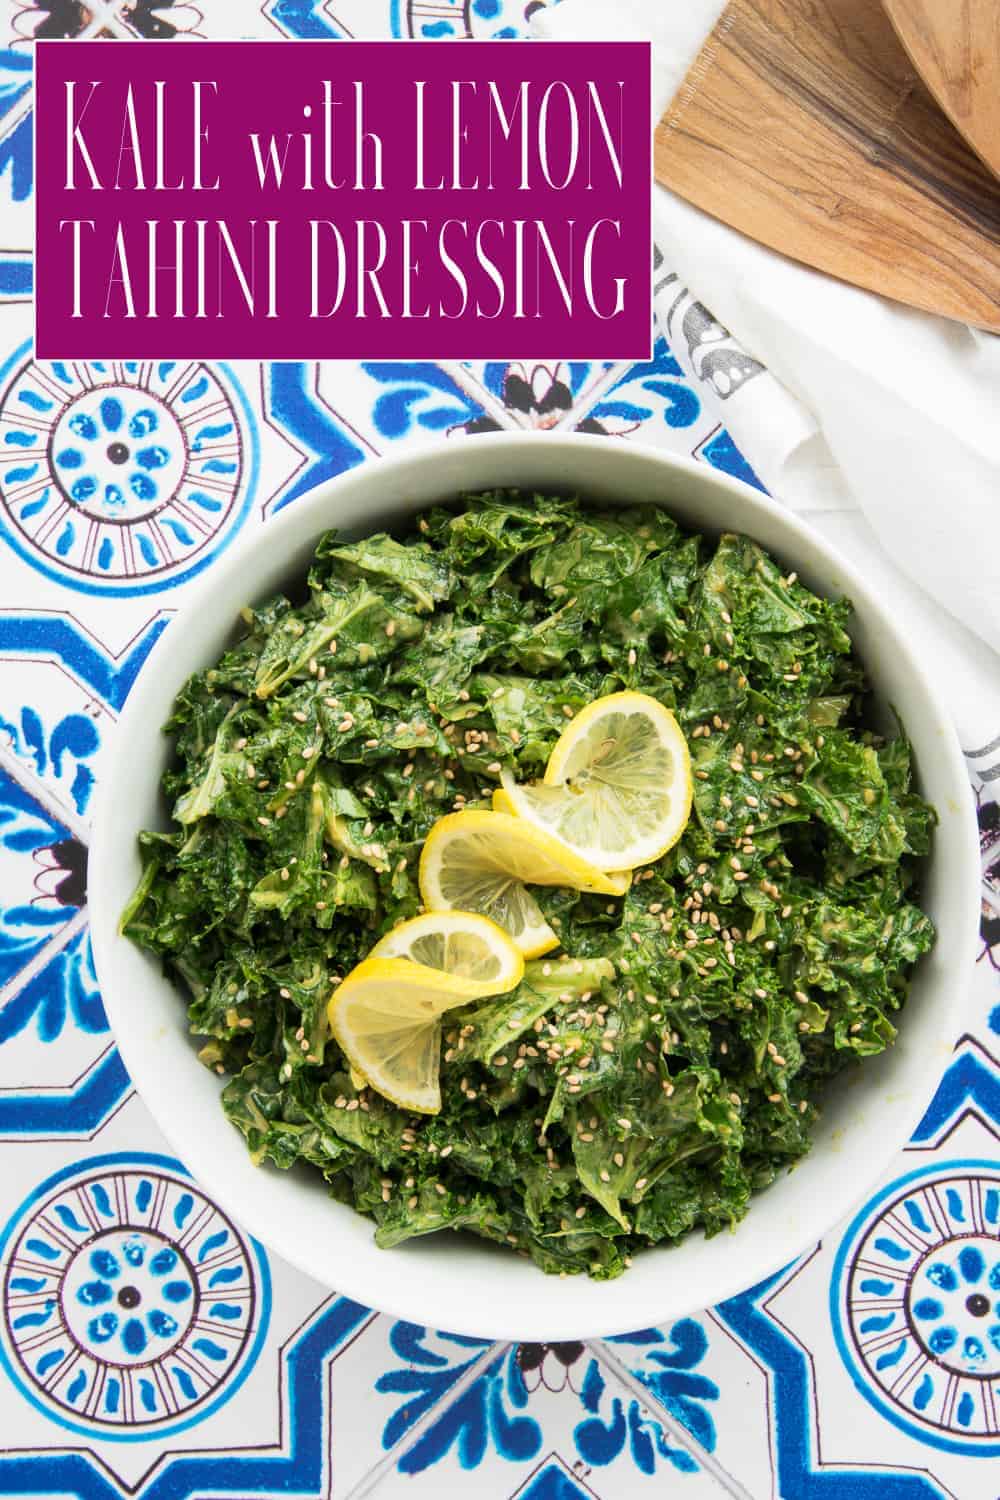 Kale with Lemon-Tahini Dressing is an easy vegan side dish that pairs well with your favorite proteins, or which can be served alone as a salad. Prepare the lemon-tahini dressing a few days ahead for an even faster recipe. #kalerecipe #greens #kalegreens #kalesalad #tahinidressing #lemontahini #tahini #salad #saladentree #entree #veganrecipe via @ediblesense